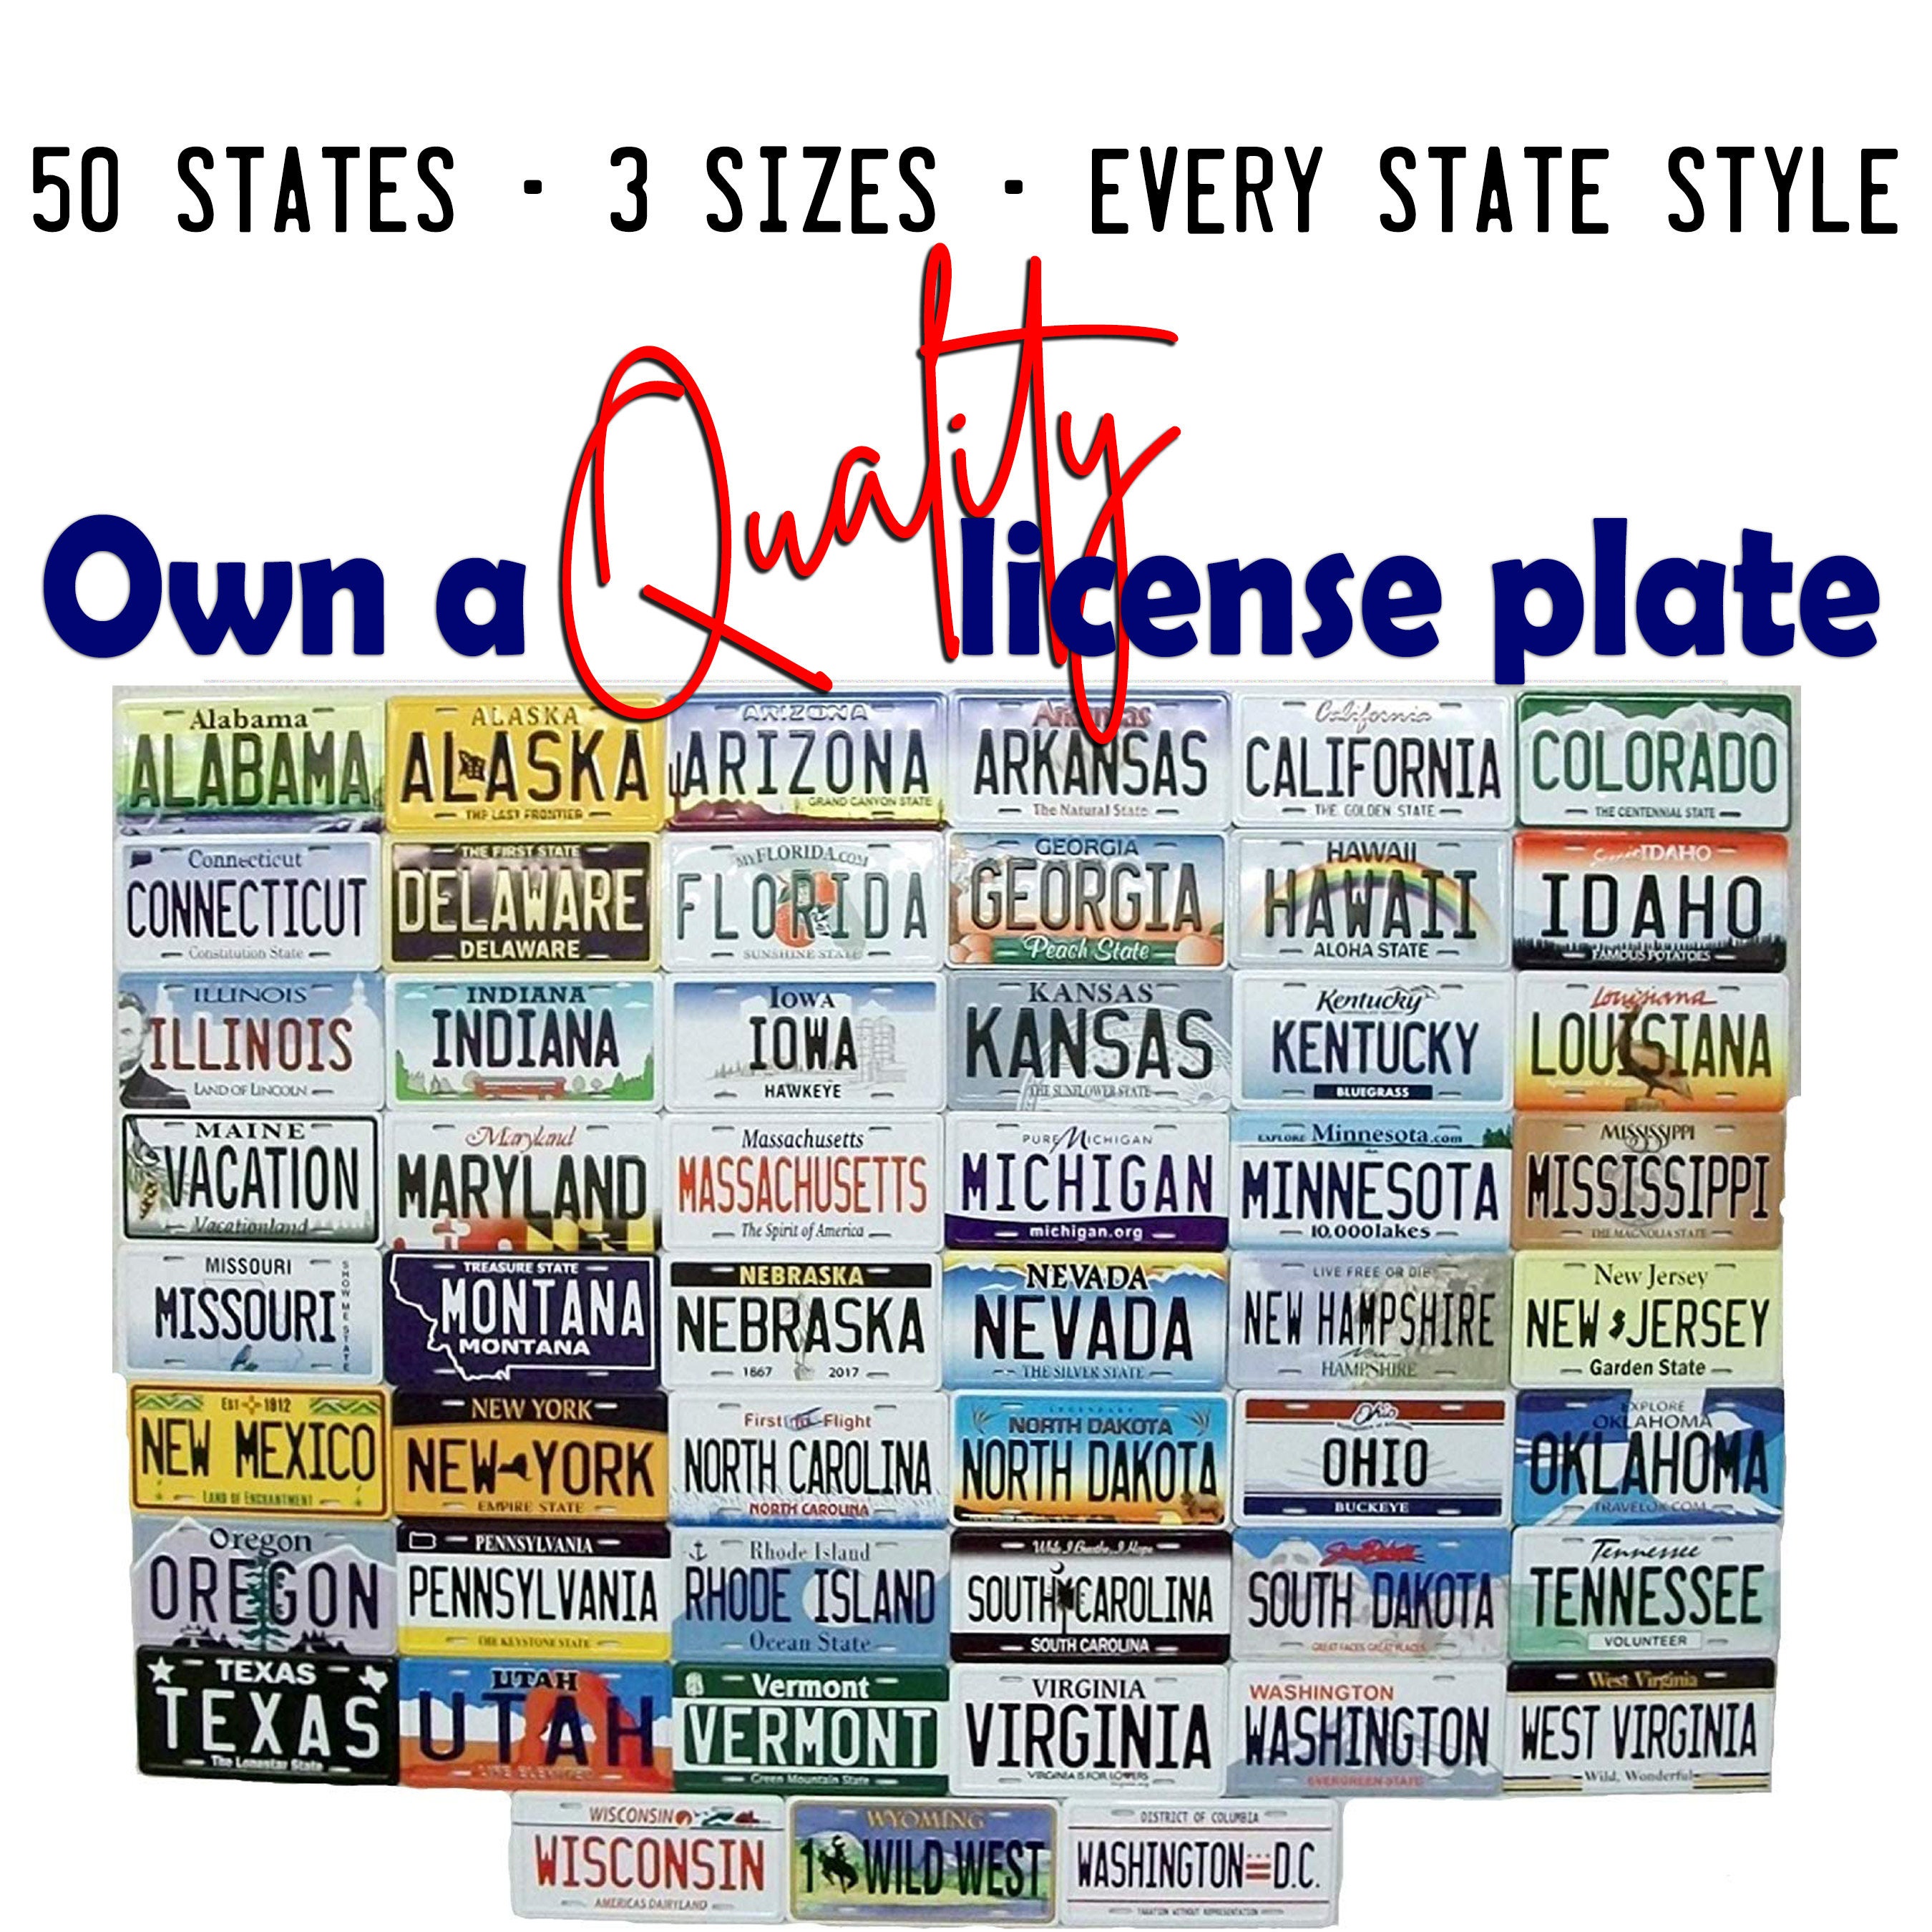 Colorado 1935 License Plate Personalized Custom Car Bike Motorcycle Moped Tag 